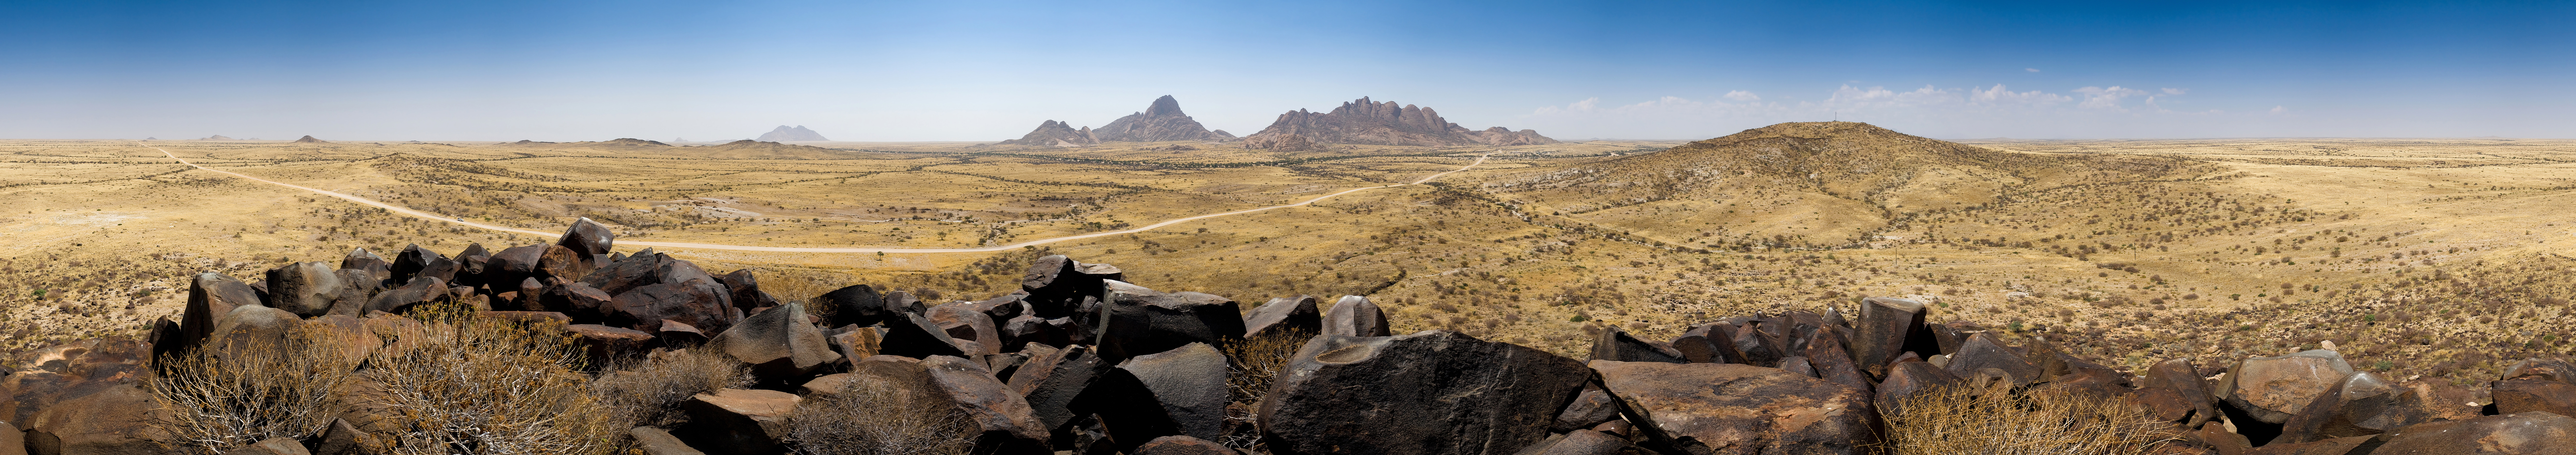 panoramic view of Spitzkoppe